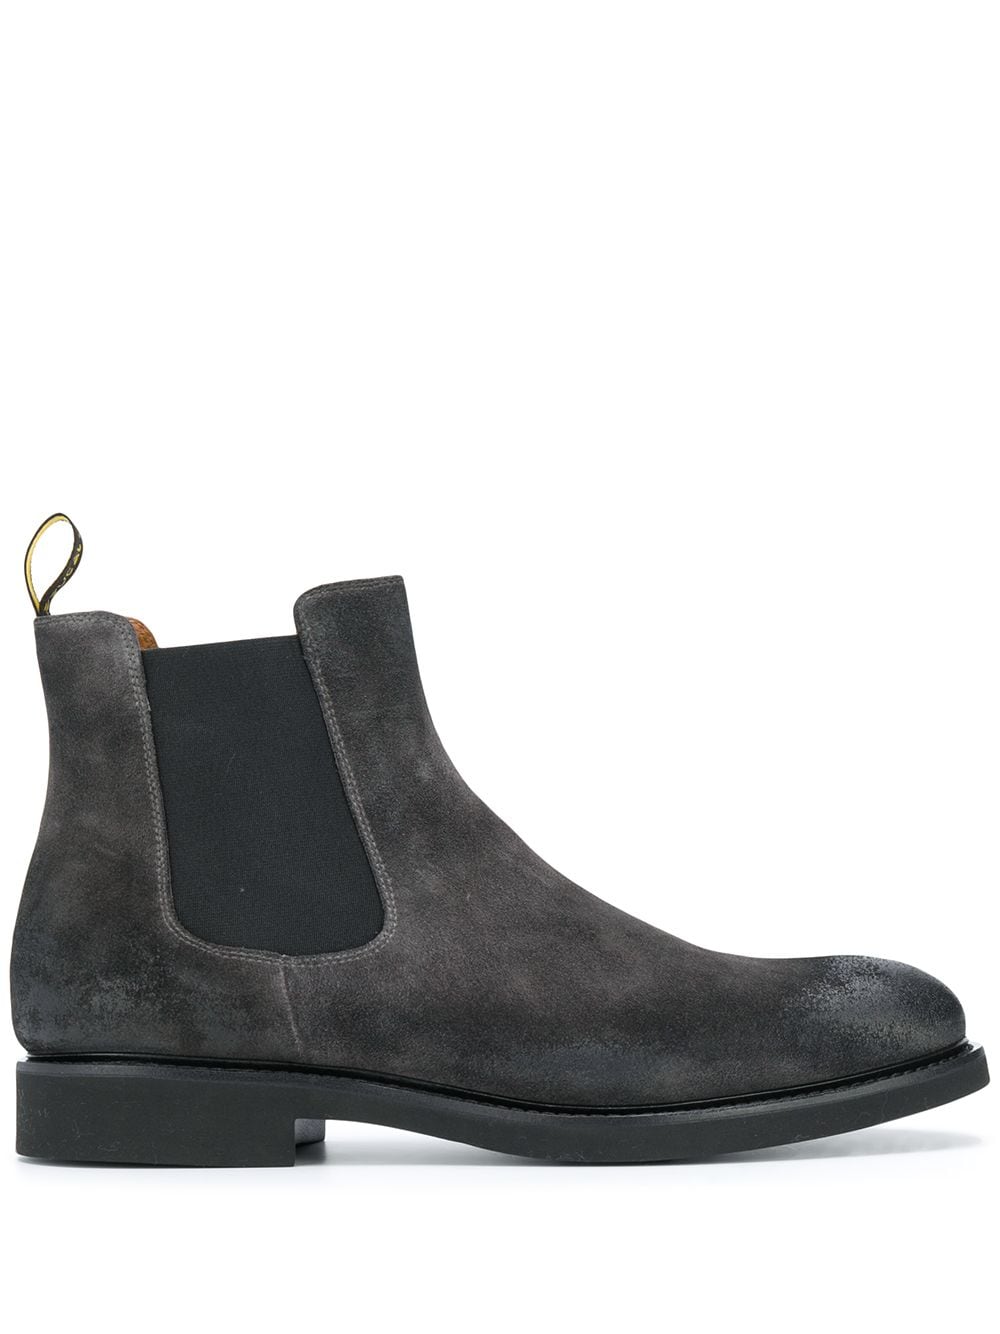 Doucal's Chelsea Boots In Black